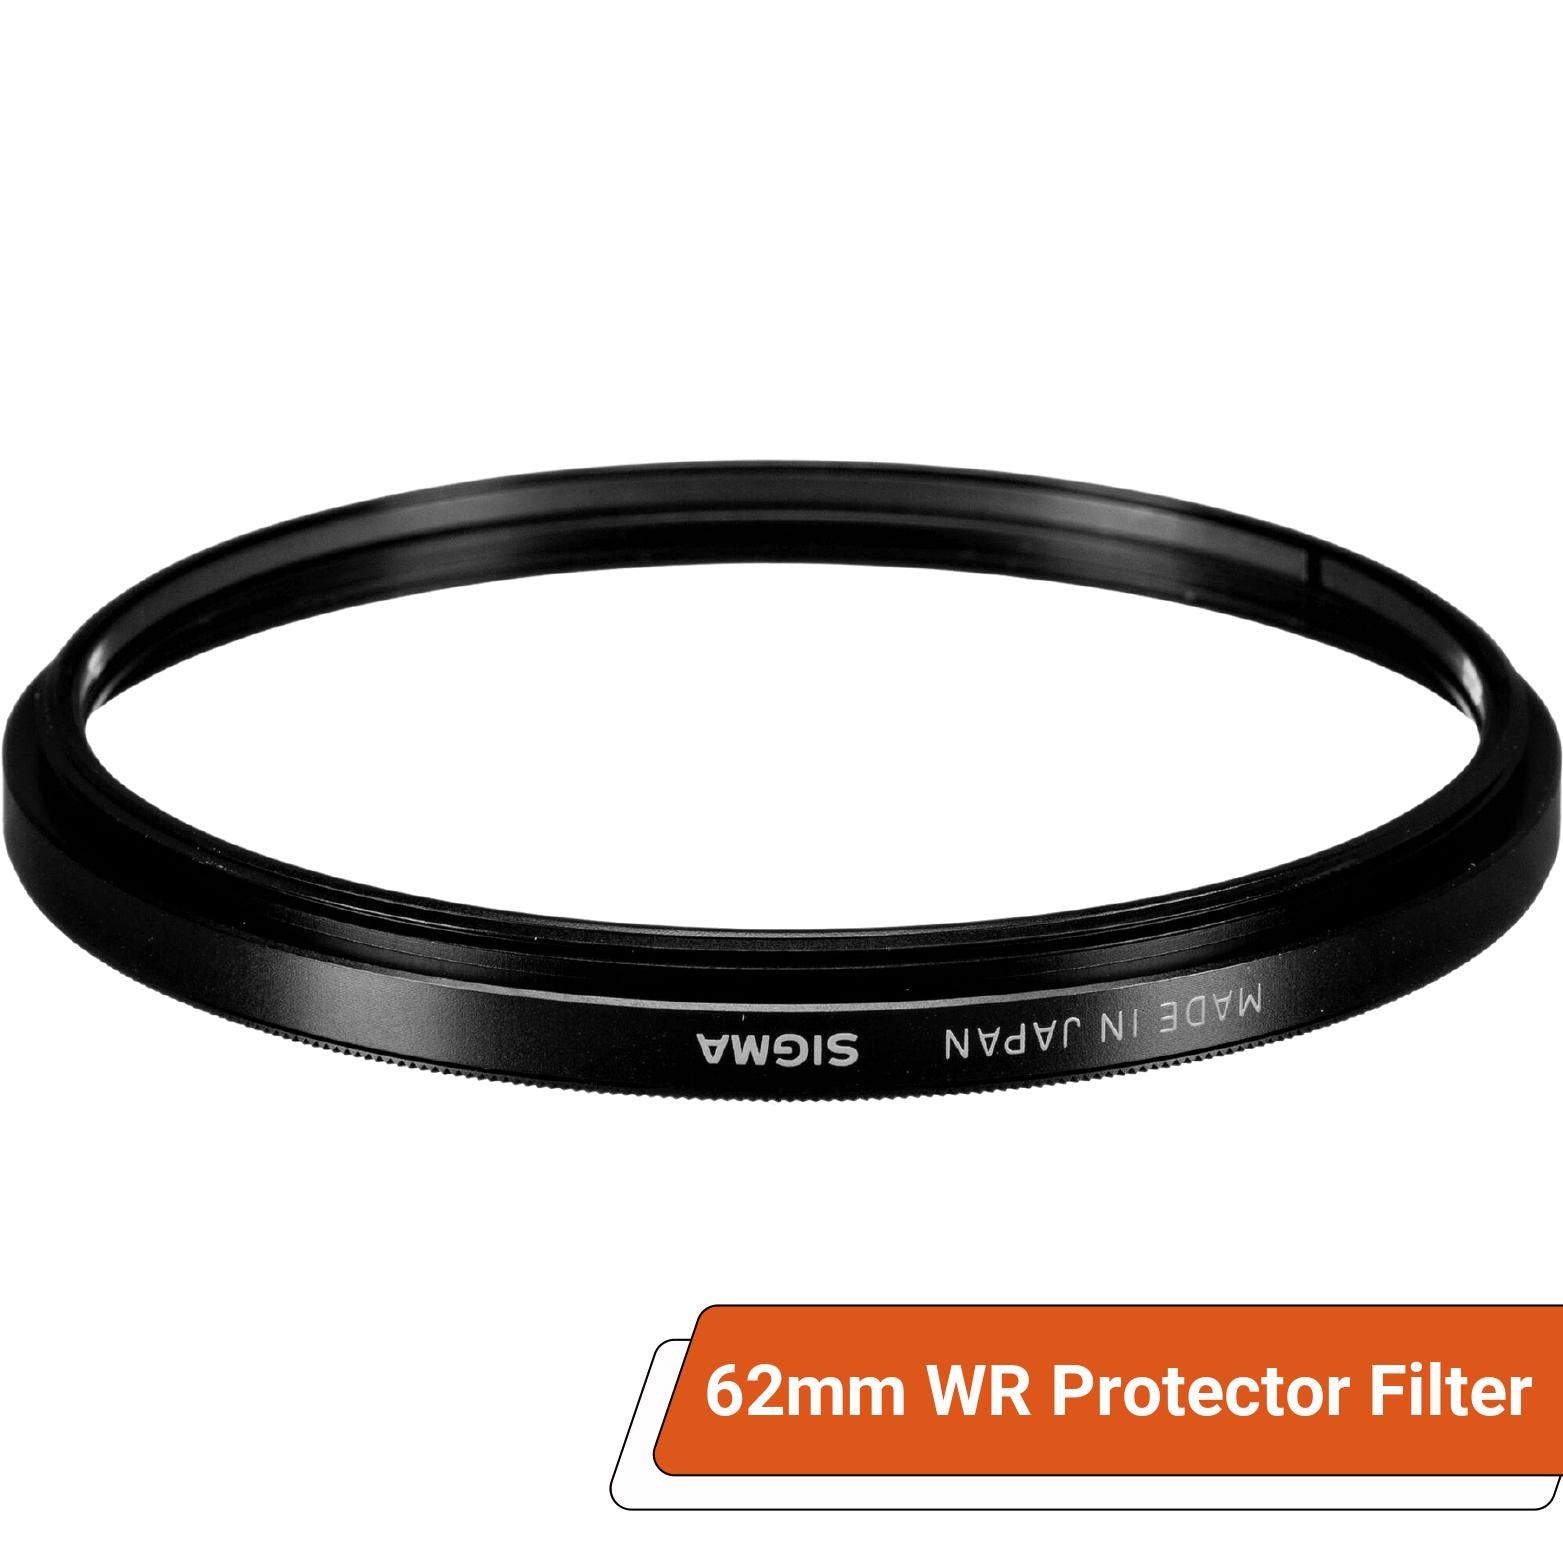 Sigma 62mm WR (Water Repellent) Protector Filter